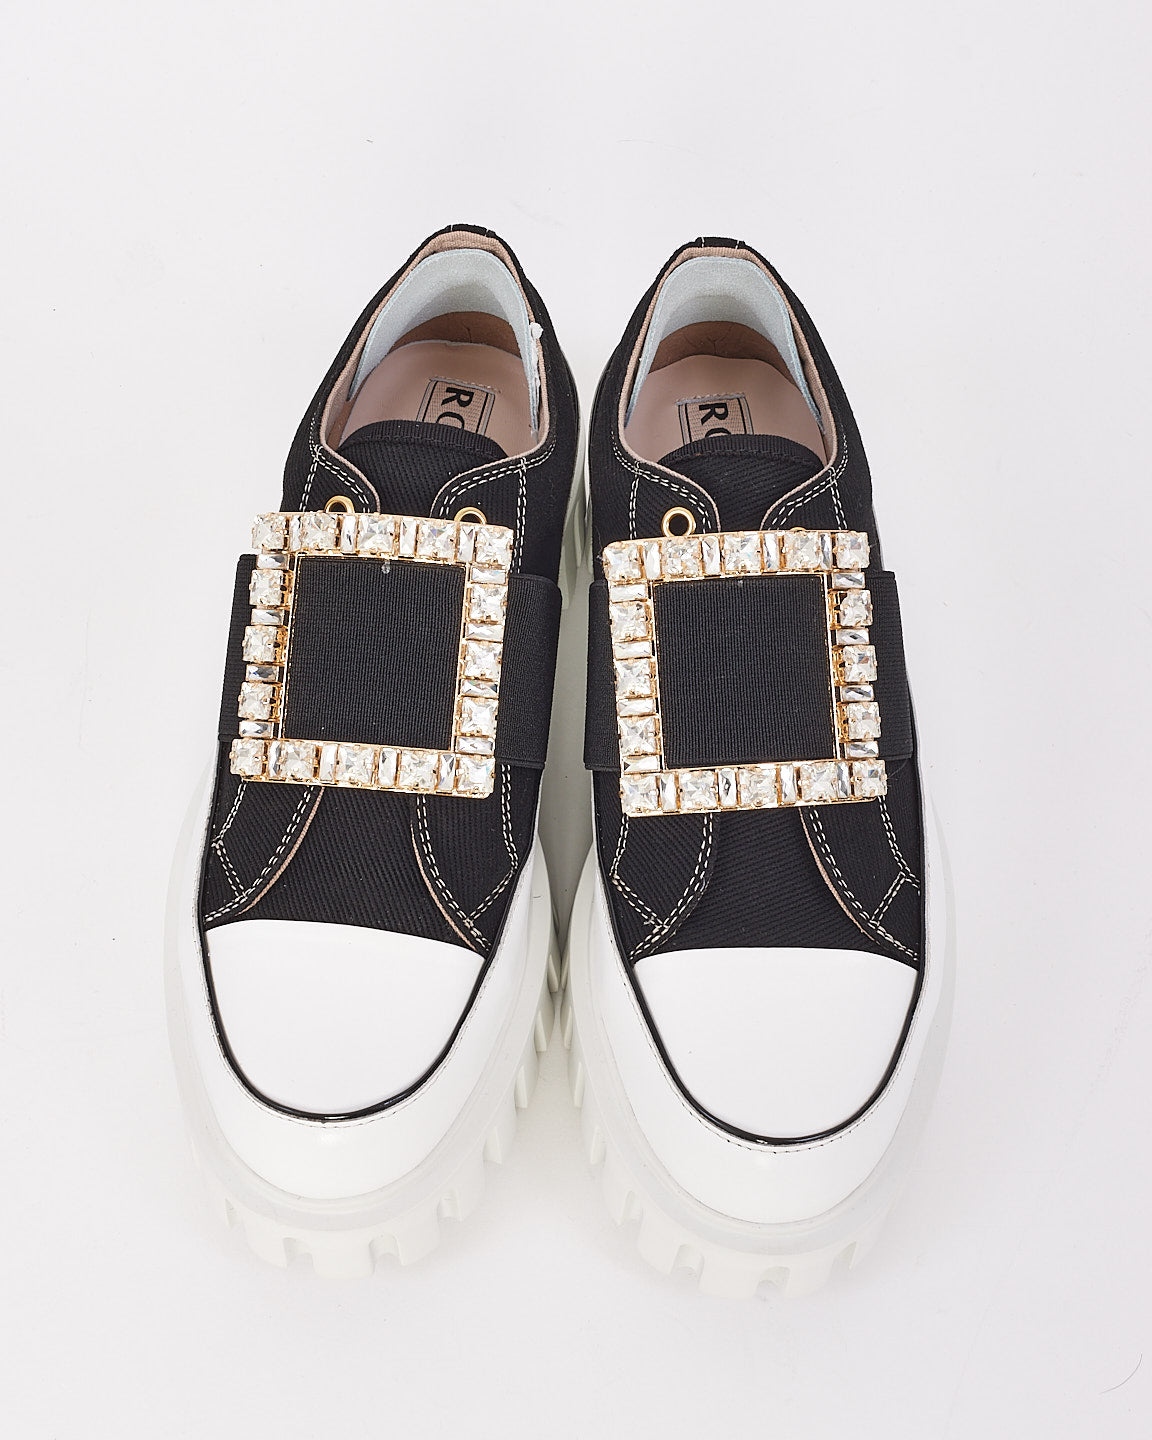 Roger Vivier Black Canvas Go Thick Strass Buckle Slip On Sneakers - 37